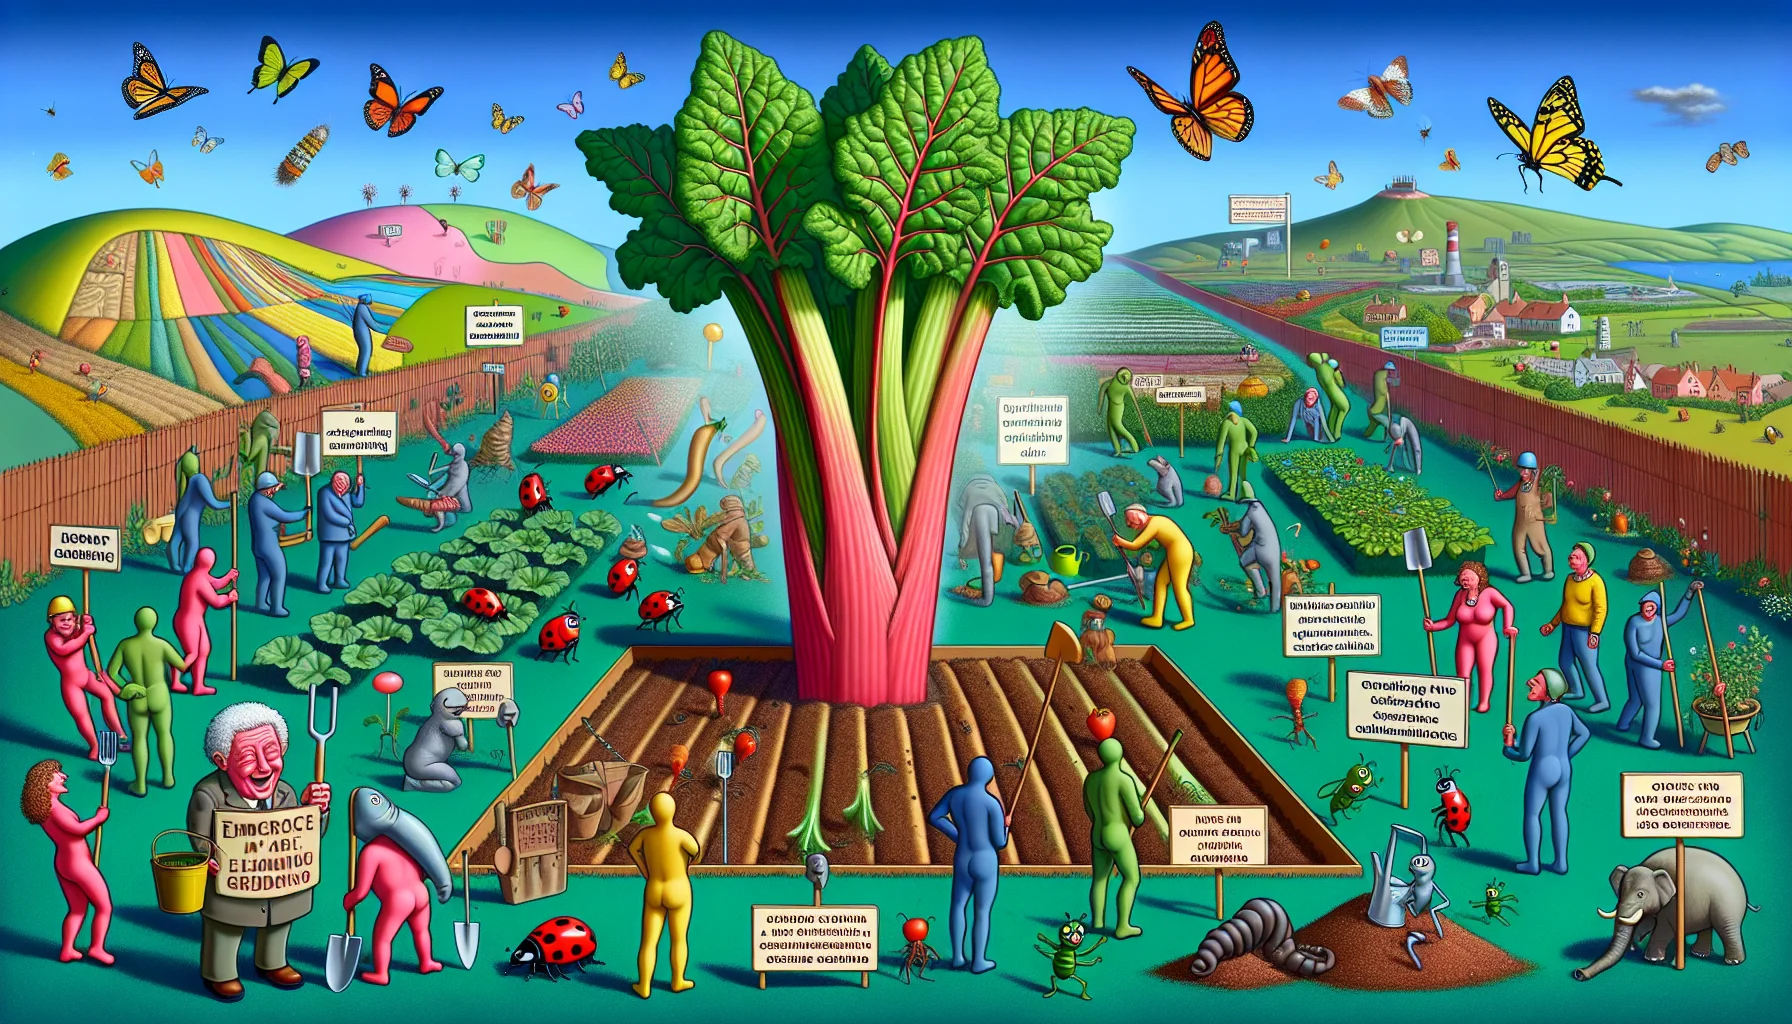 Think about a vivid, comical scene involving a garden. In the center, there's a gigantic rhubarb emanating an aura of grandeur. Ladybirds and butterflies flutter around it in a surreal dance. The background showcases distinct geographical areas, denoting different rhubarb growing zones. There are humanoid earthworms and ants, each holding tiny informative signs about the optimal conditions for growing rhubarb in these areas. Around the garden, people of various descents, genders, and ages are joyously digging, weeding, and watering. There's an inspiring signpost in the corner that reads 'Embrace the Earth, Enjoy Gardening'.